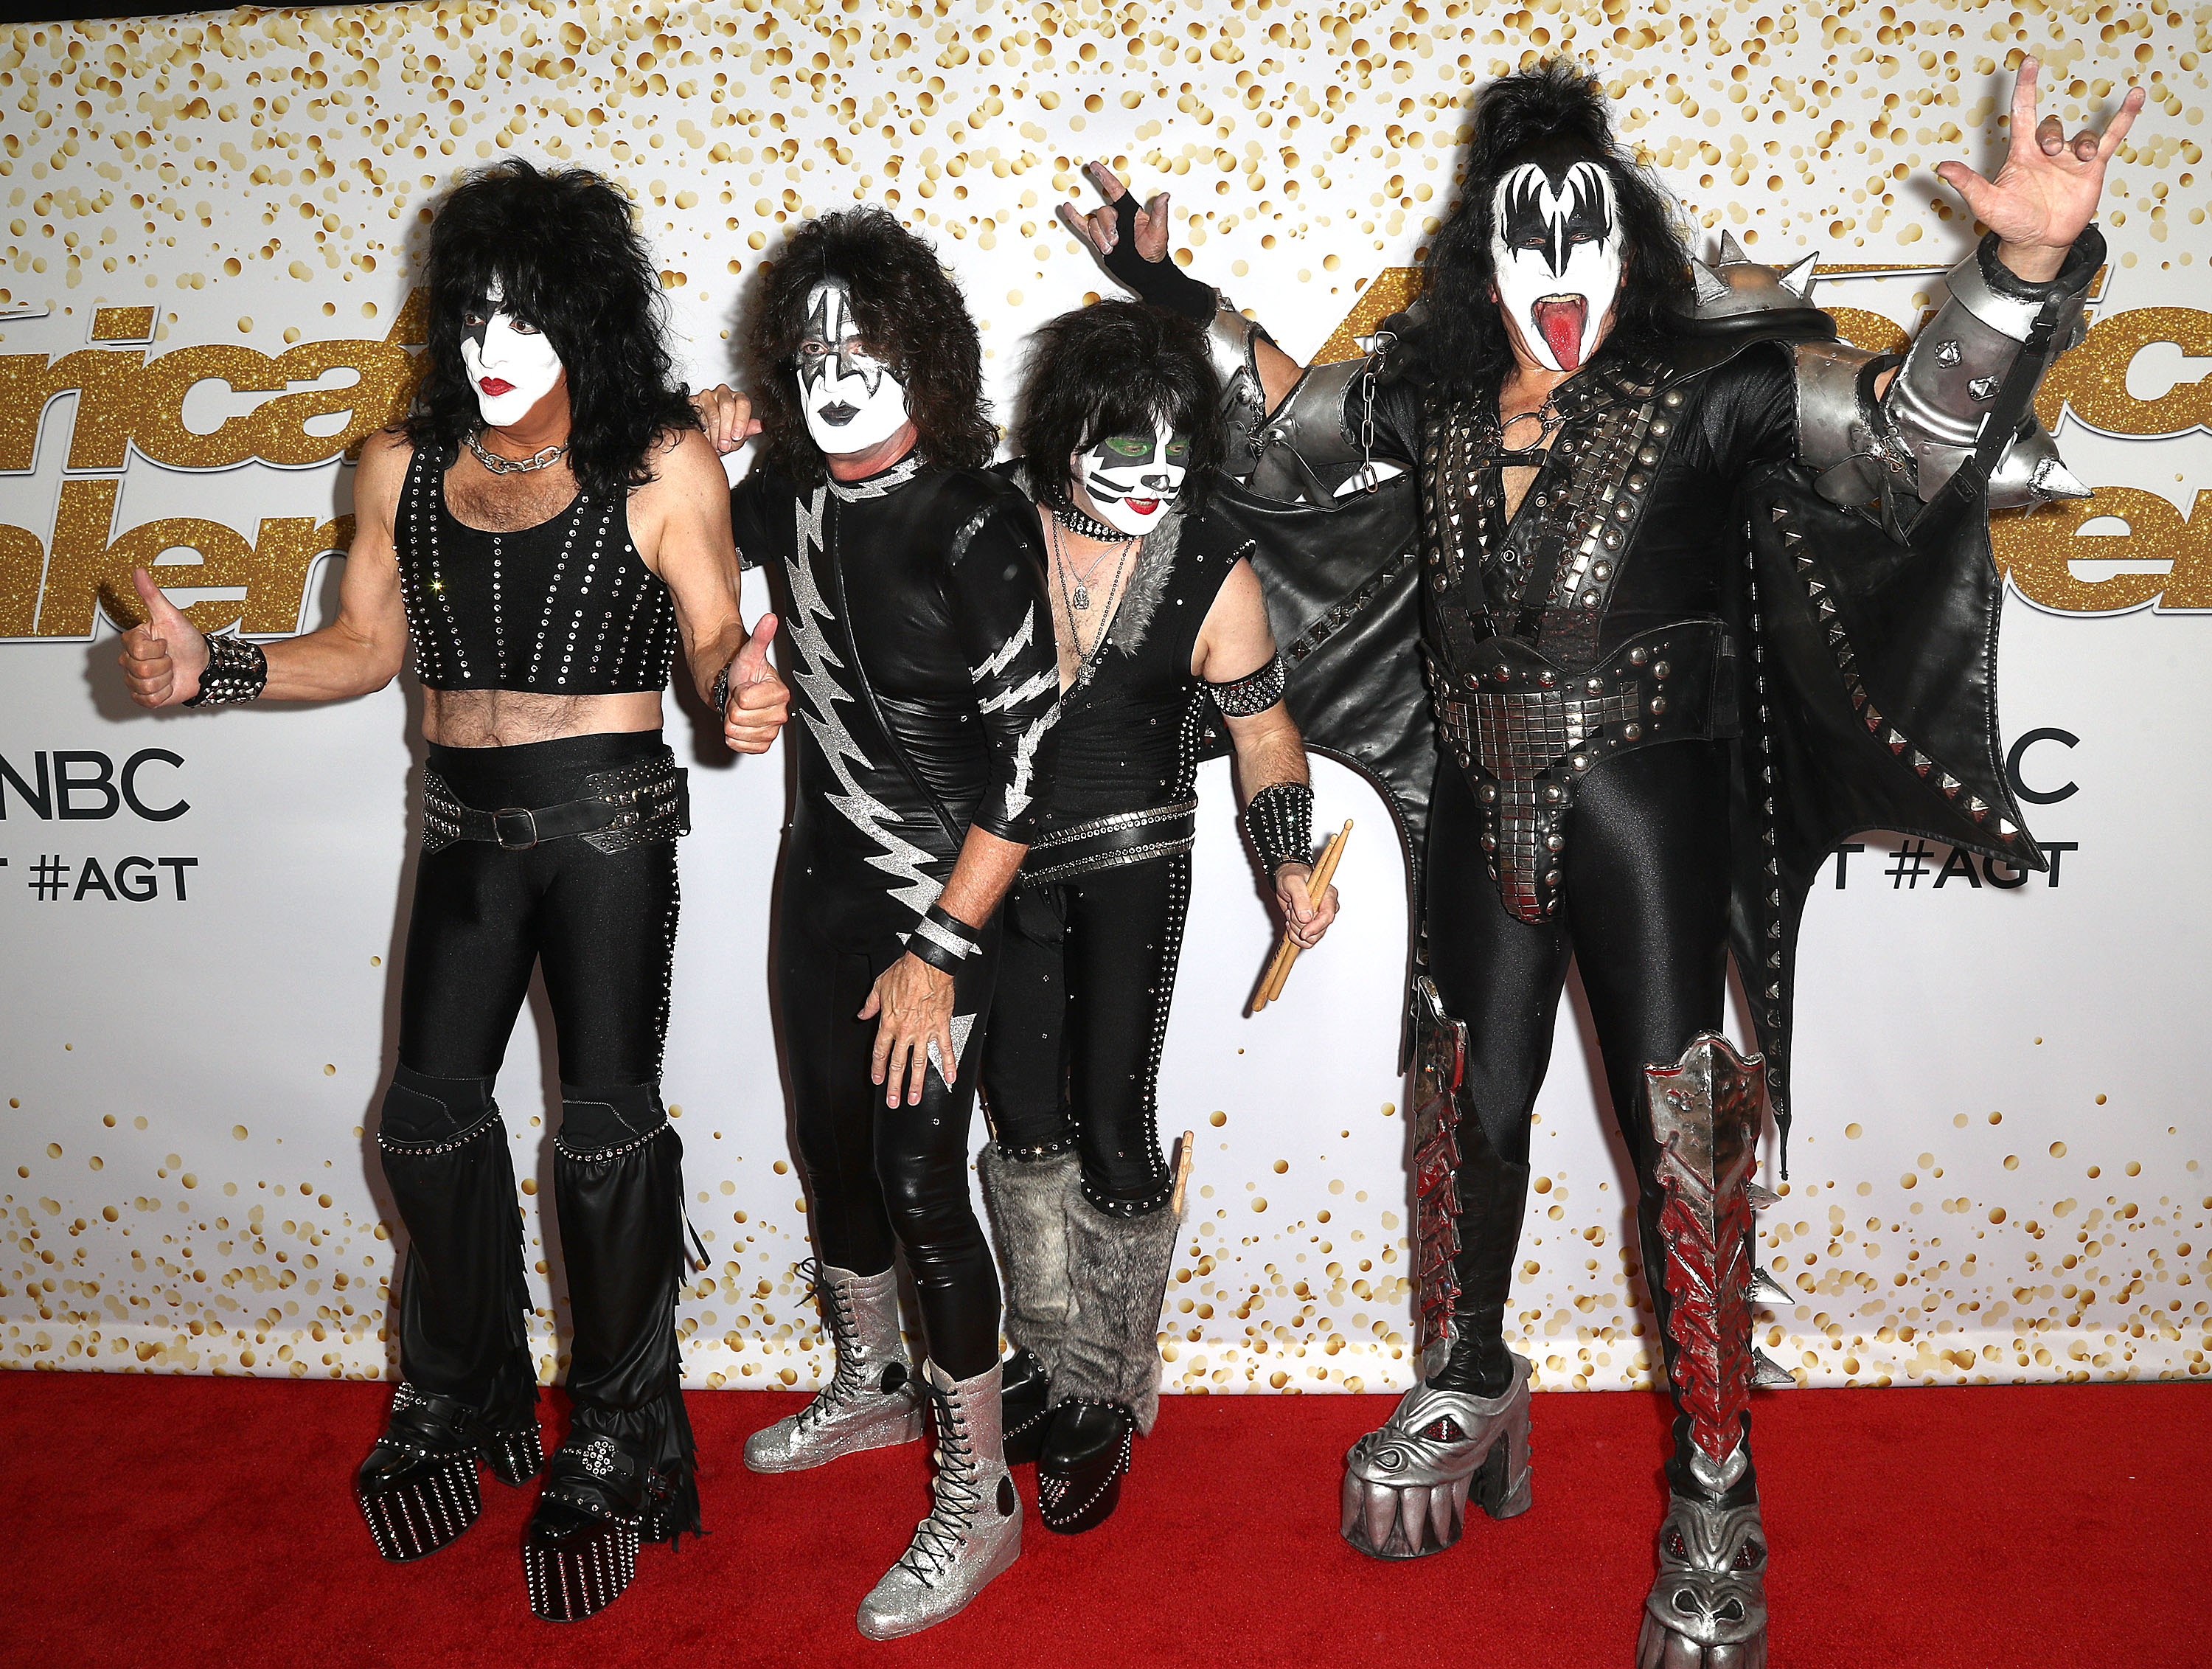 Paul Stanley, Tommy Thayer, Eric Singer y Gene Simmons | Agence France-Presse 